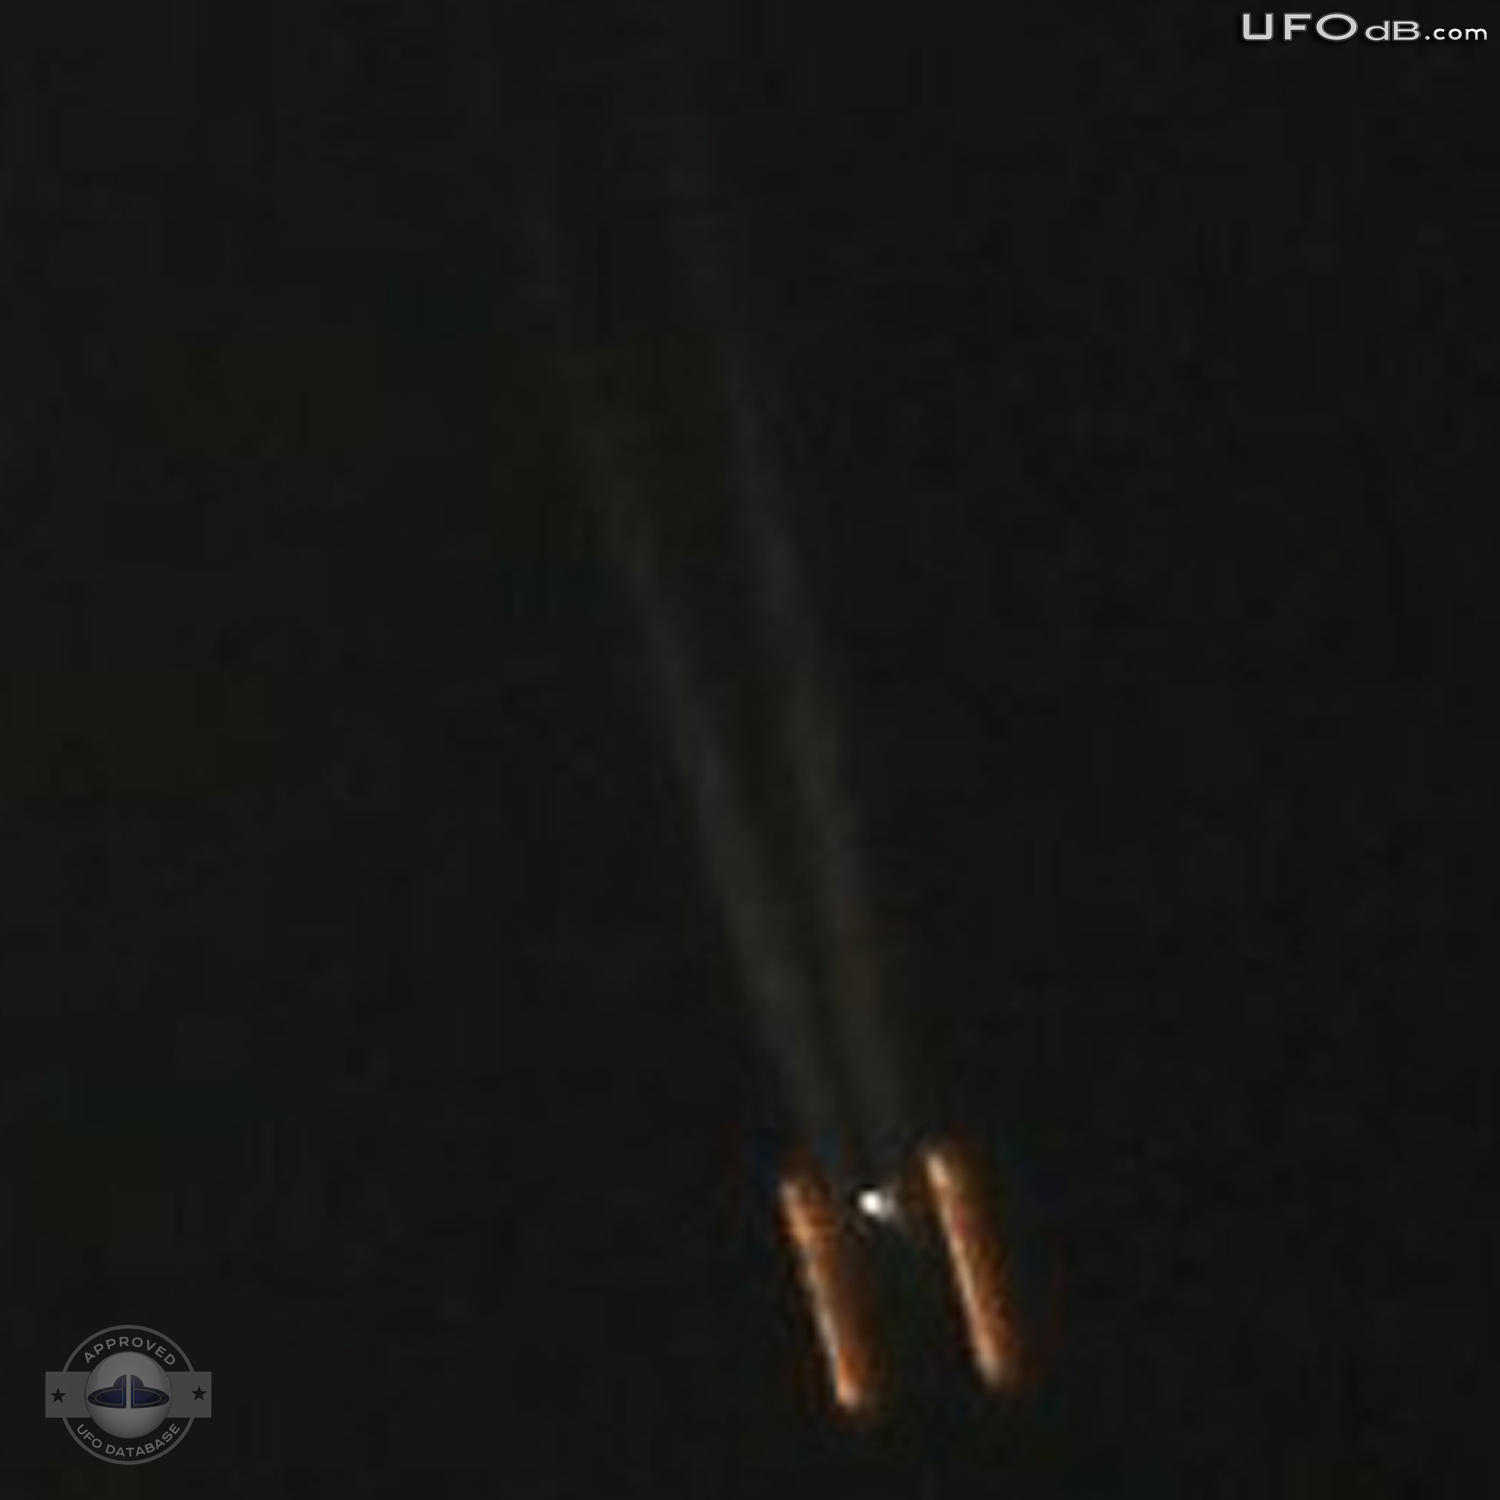 Moon picture captures a very strange shaped UFO | Louisiana USA 2011 UFO Picture #257-4